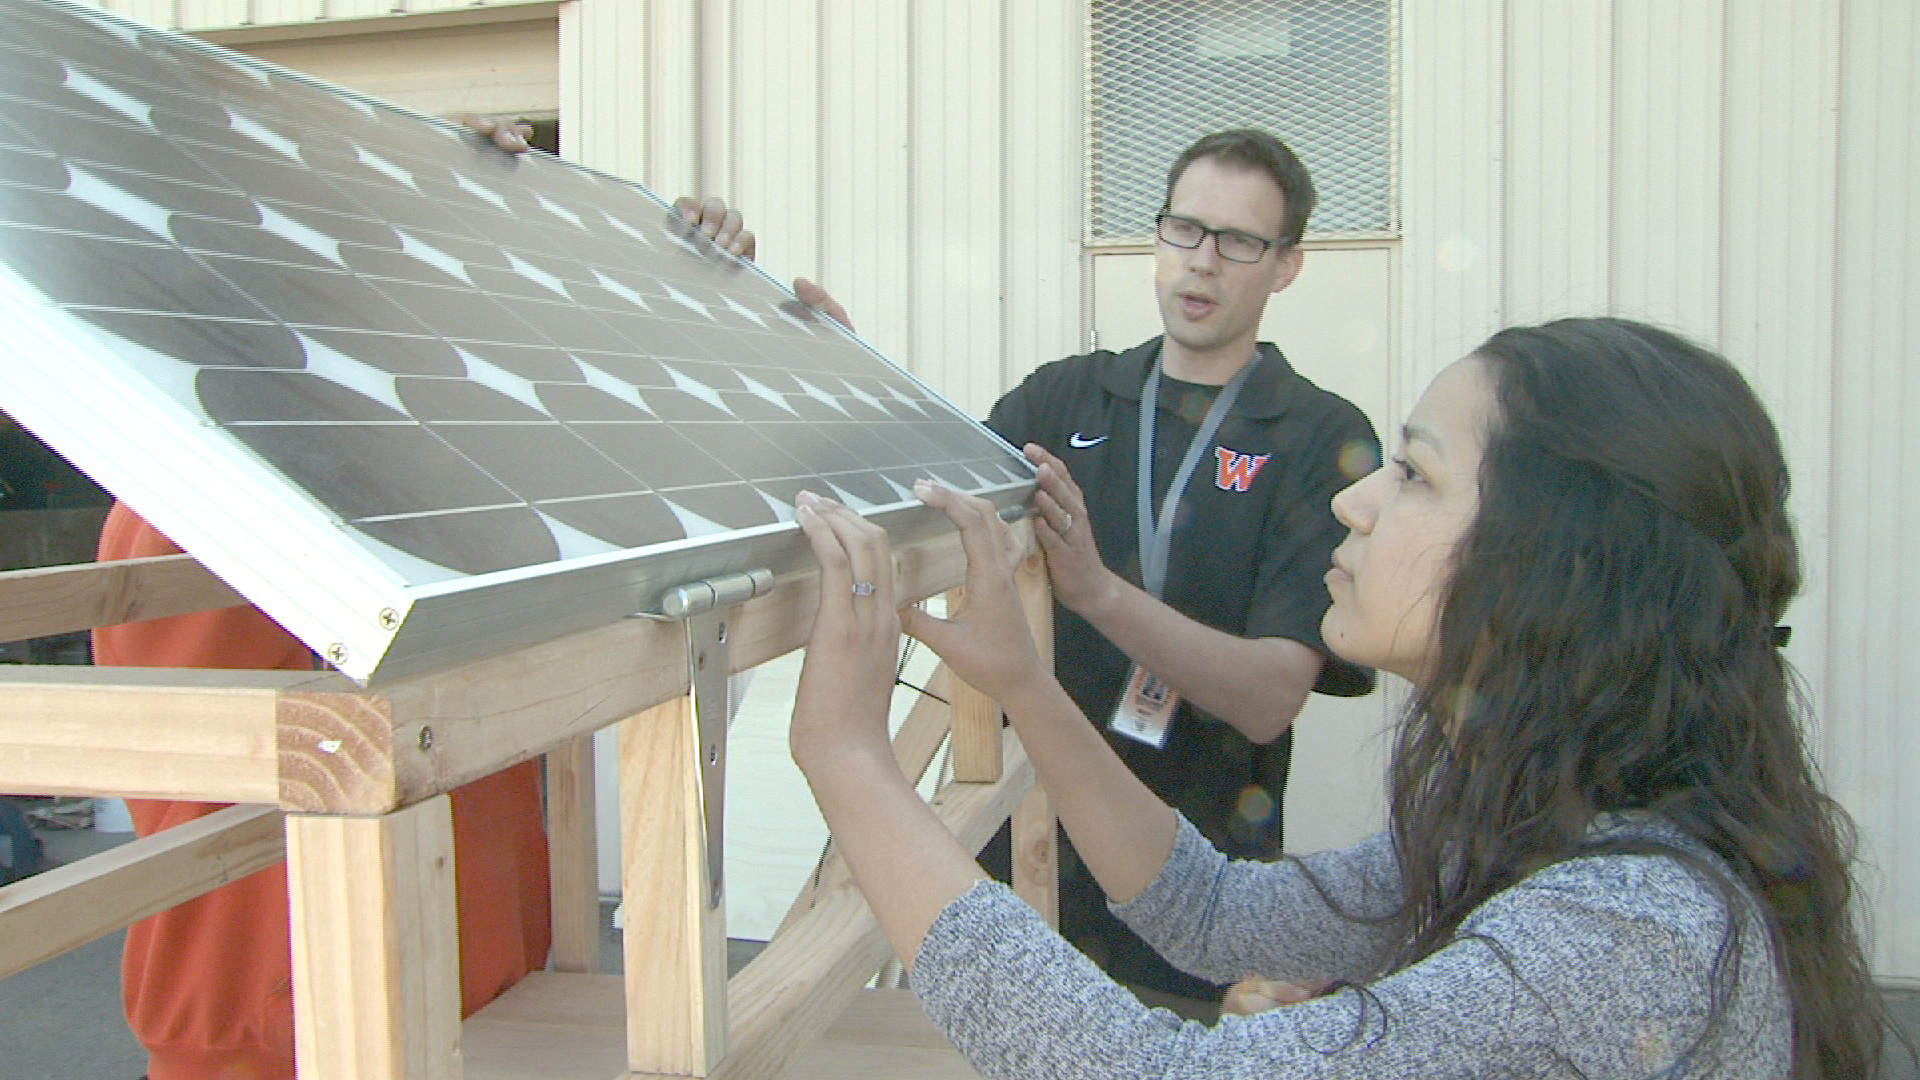 Clean Energy and Fuel Intensive Course at West Generation Academy builds solar cell phone charger as a final project.